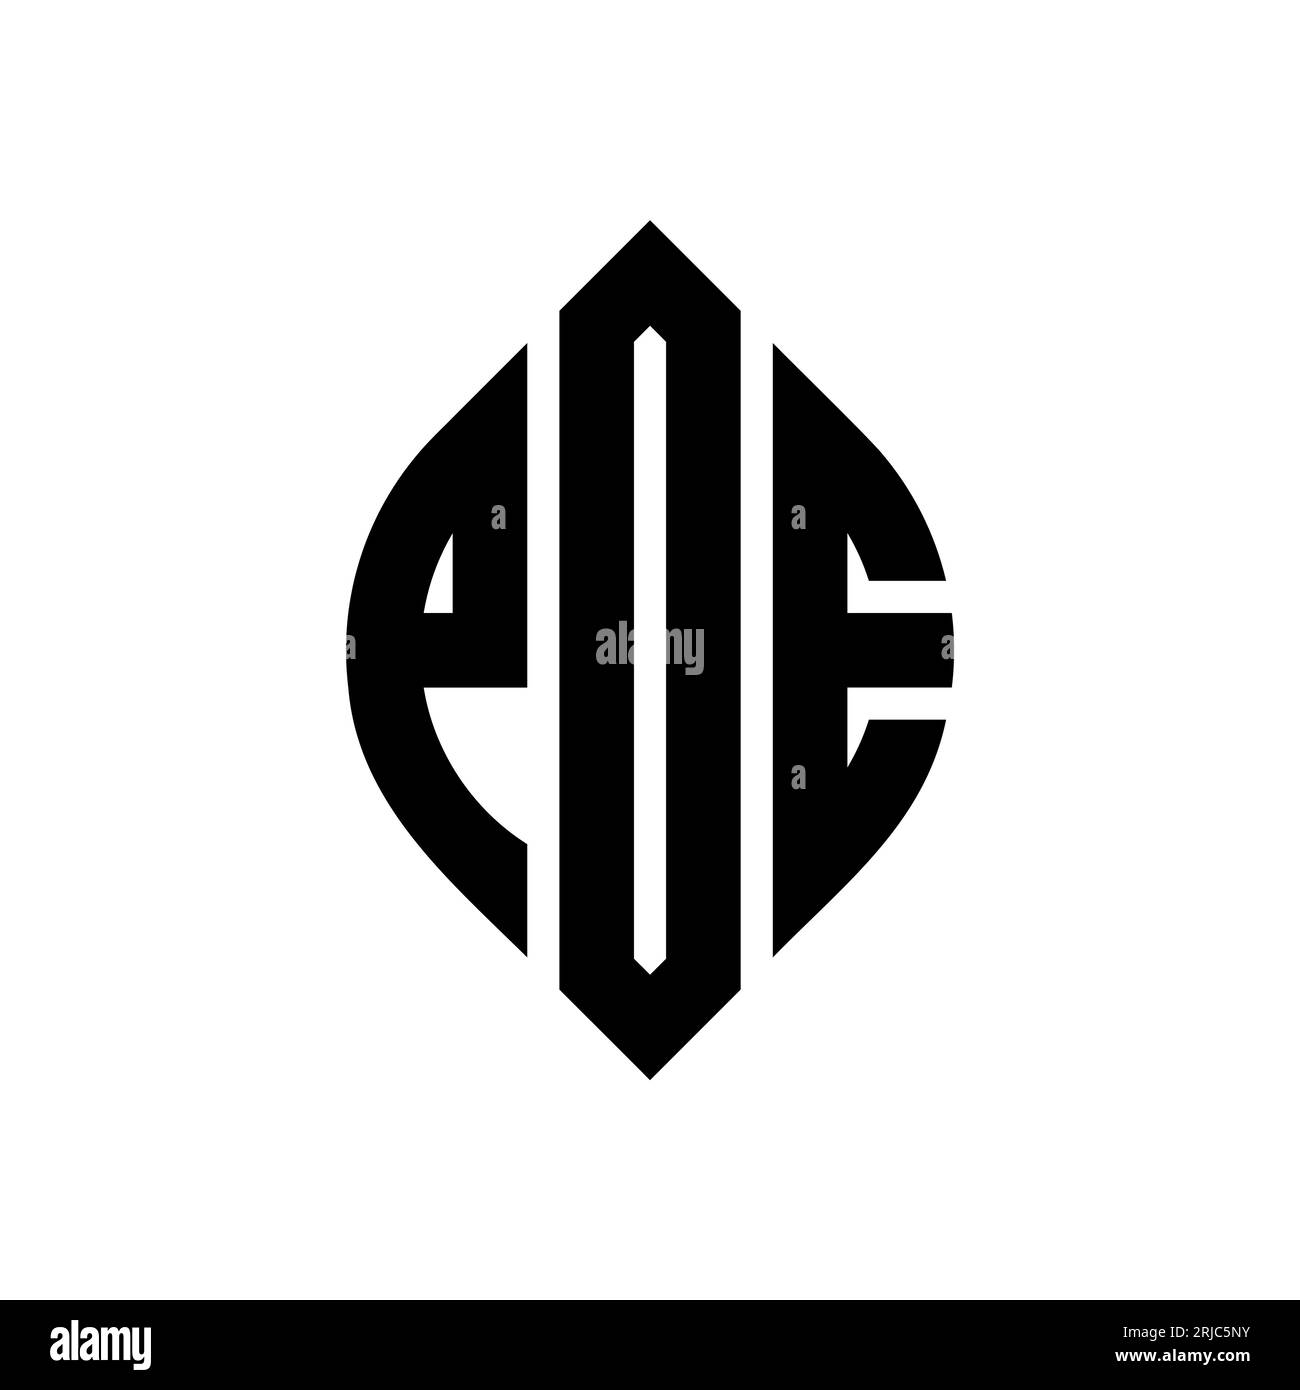 POE circle letter logo design with circle and ellipse shape. POE ellipse letters with typographic style. The three initials form a circle logo. POE Ci Stock Vector